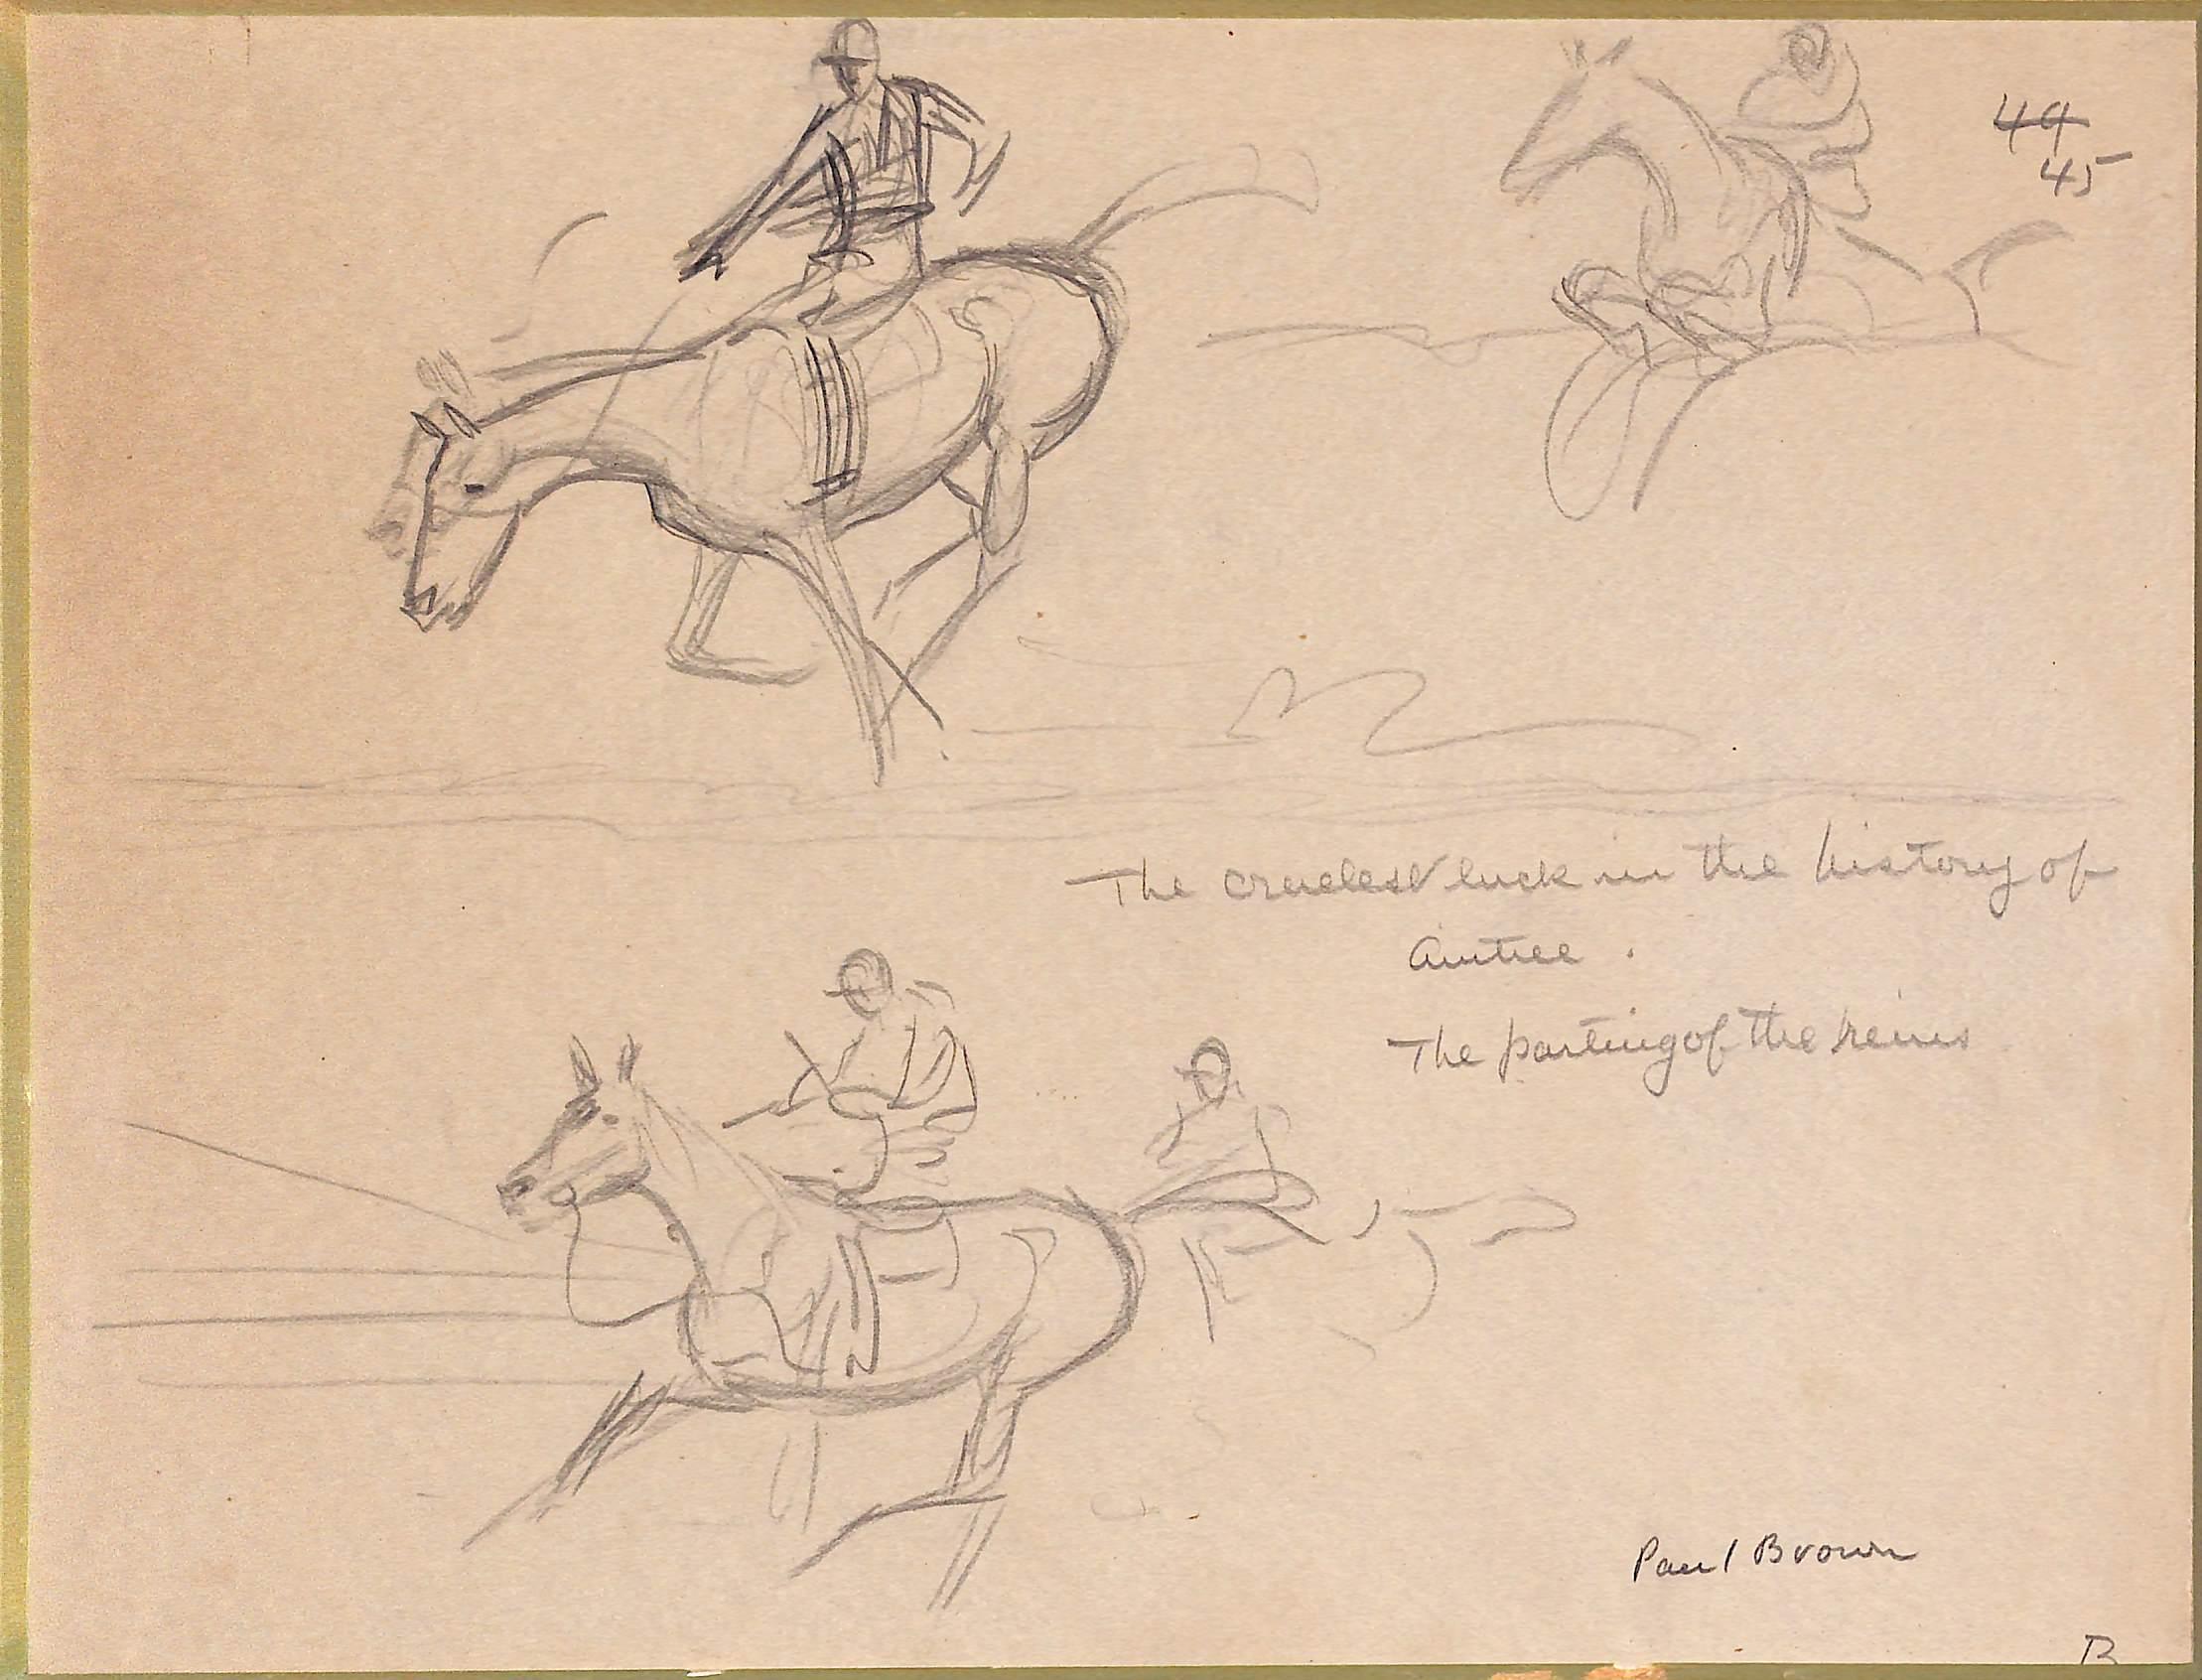 'The Cruelest Luck In The History Of Aintree: The Parting Of The Reins' Pencil D - Art by Paul Desmond Brown